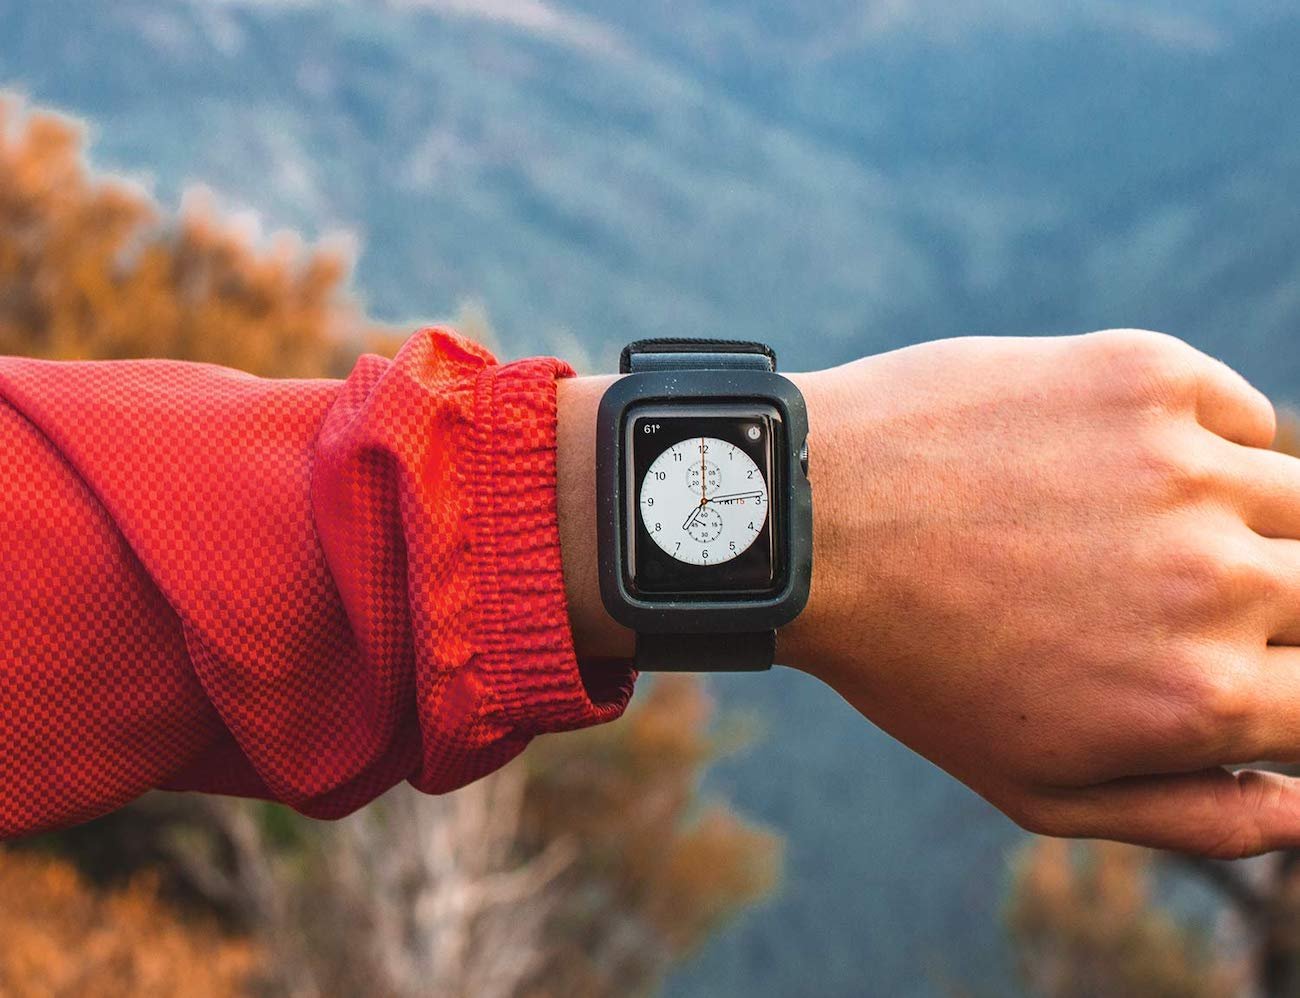 Lander Moab Apple Watch Case and Band protects your watch on adventures